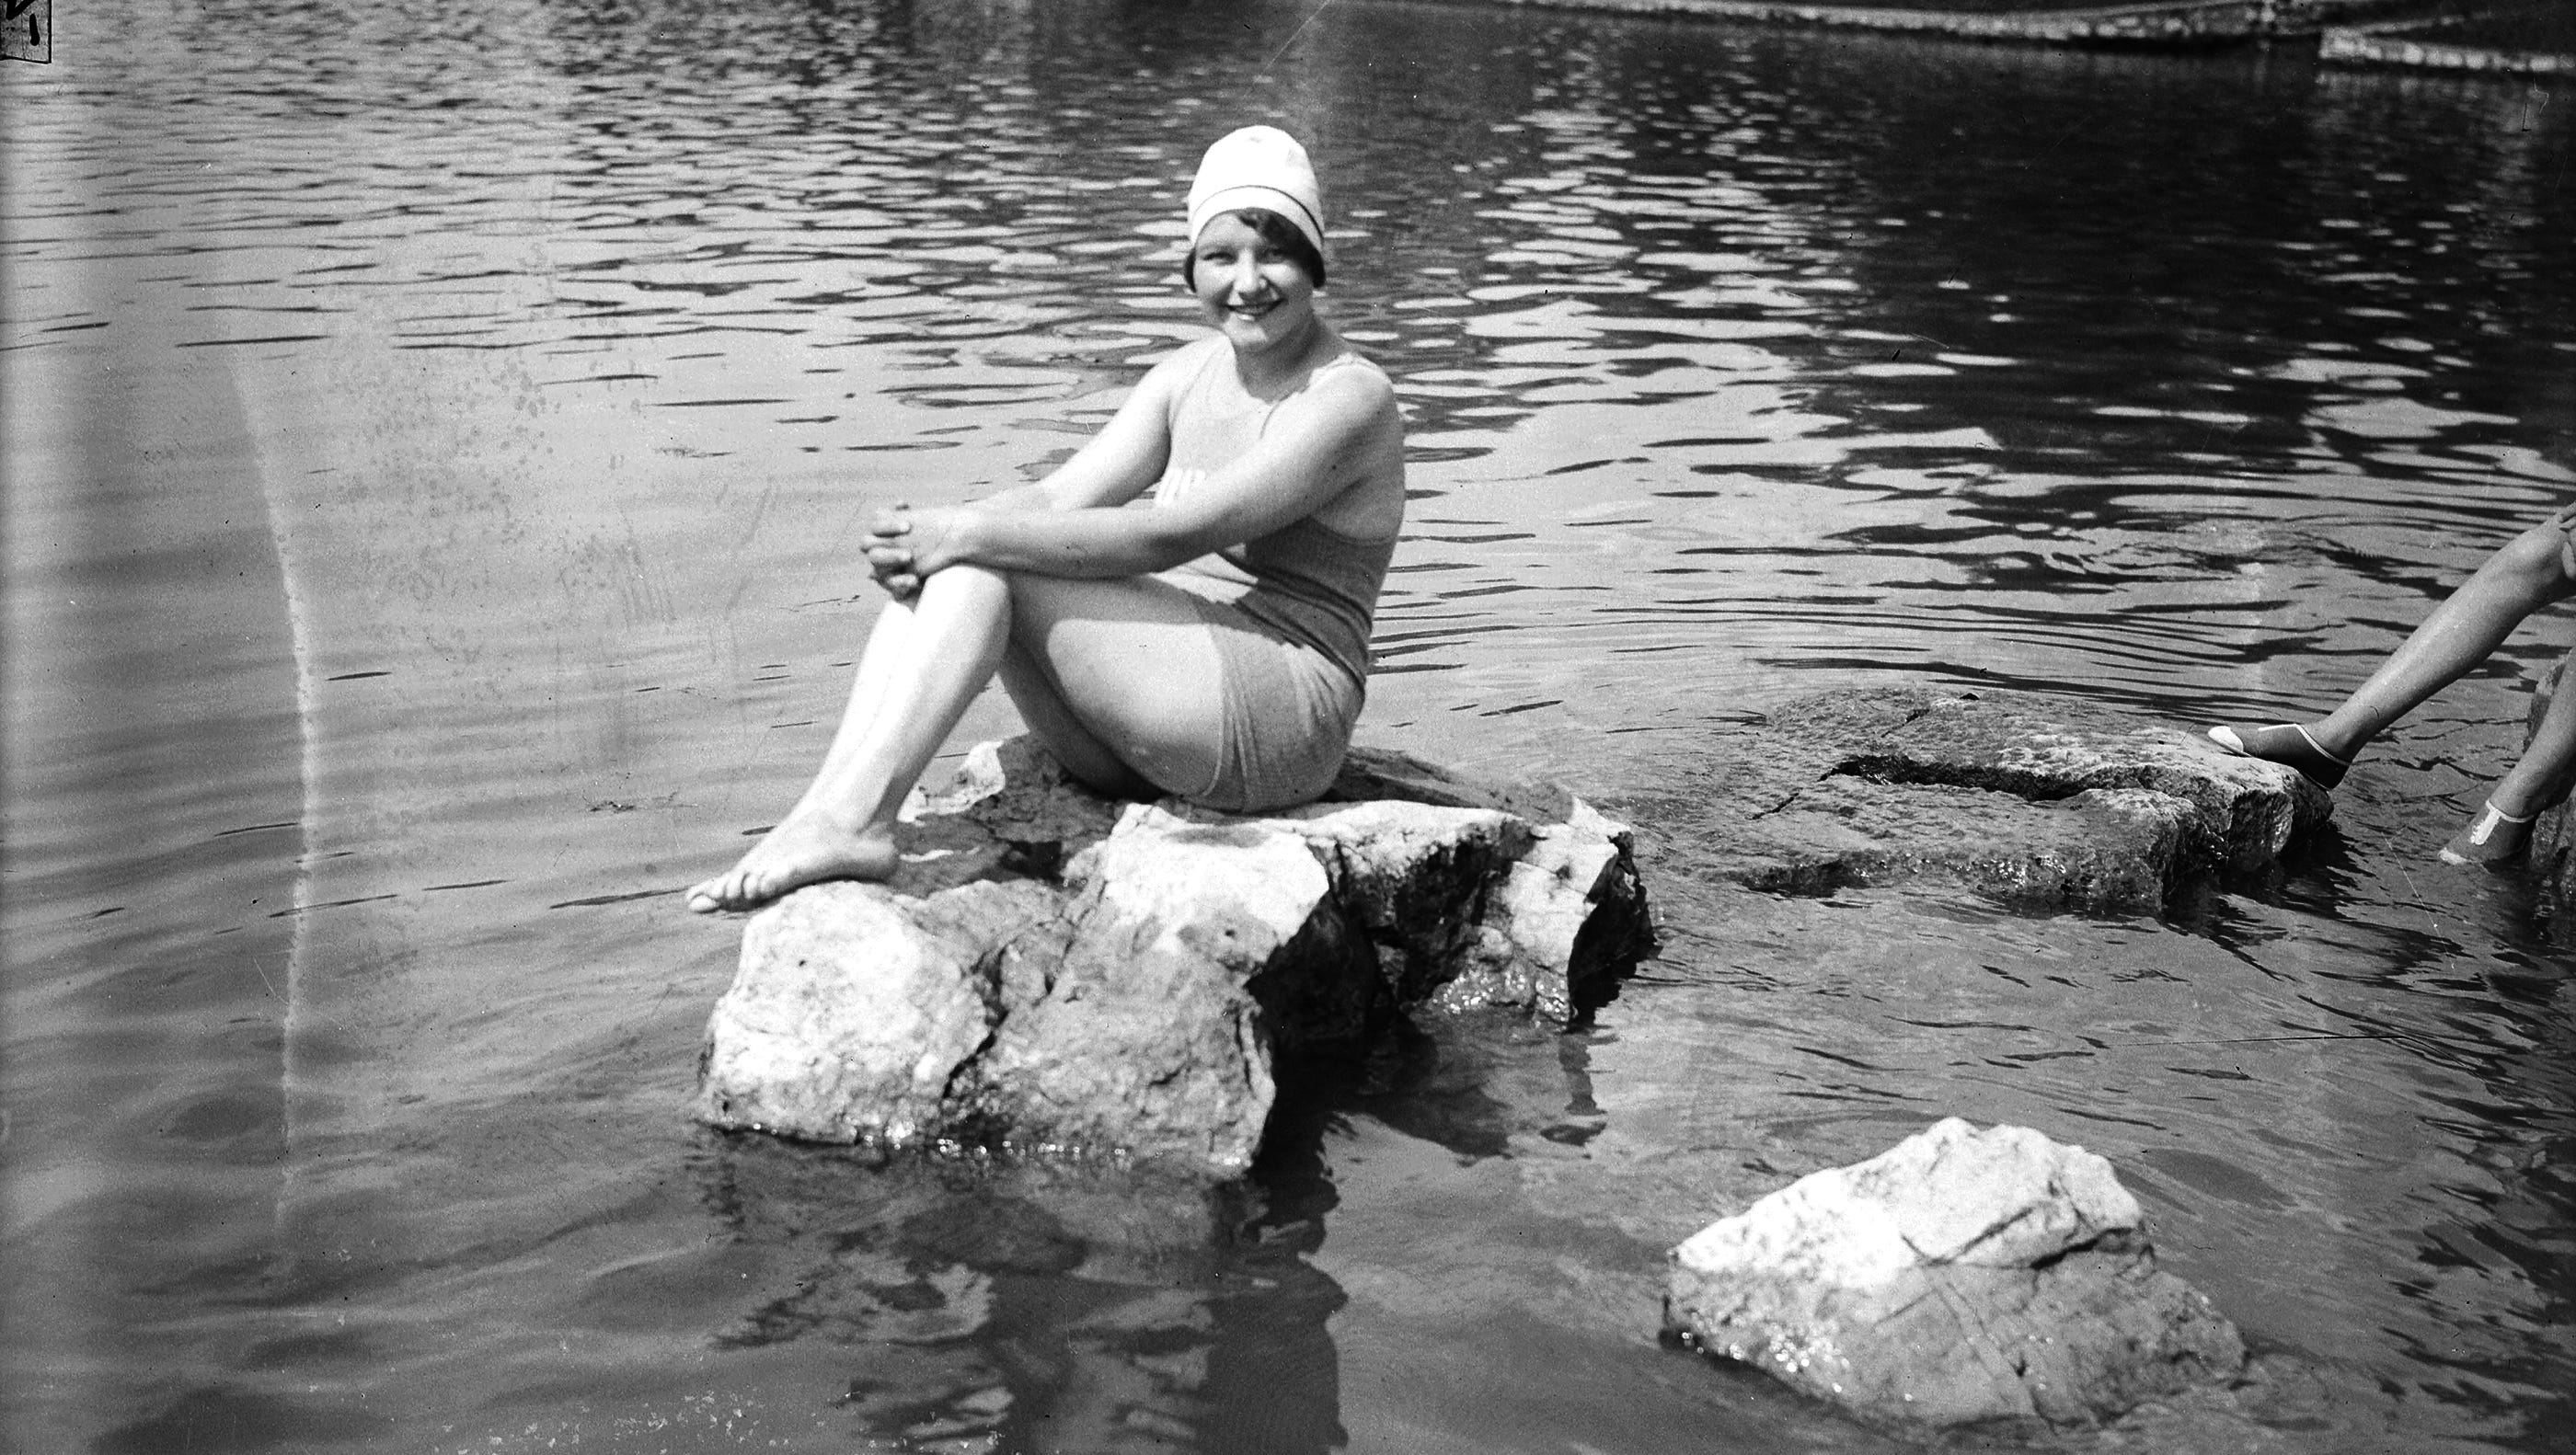 A bather poses at Boblo Island on the Canadian side of the Detroit River in the 1920s. The initial attractions of the island were mostly simple: a day on the river and a picnic in a park-like setting.